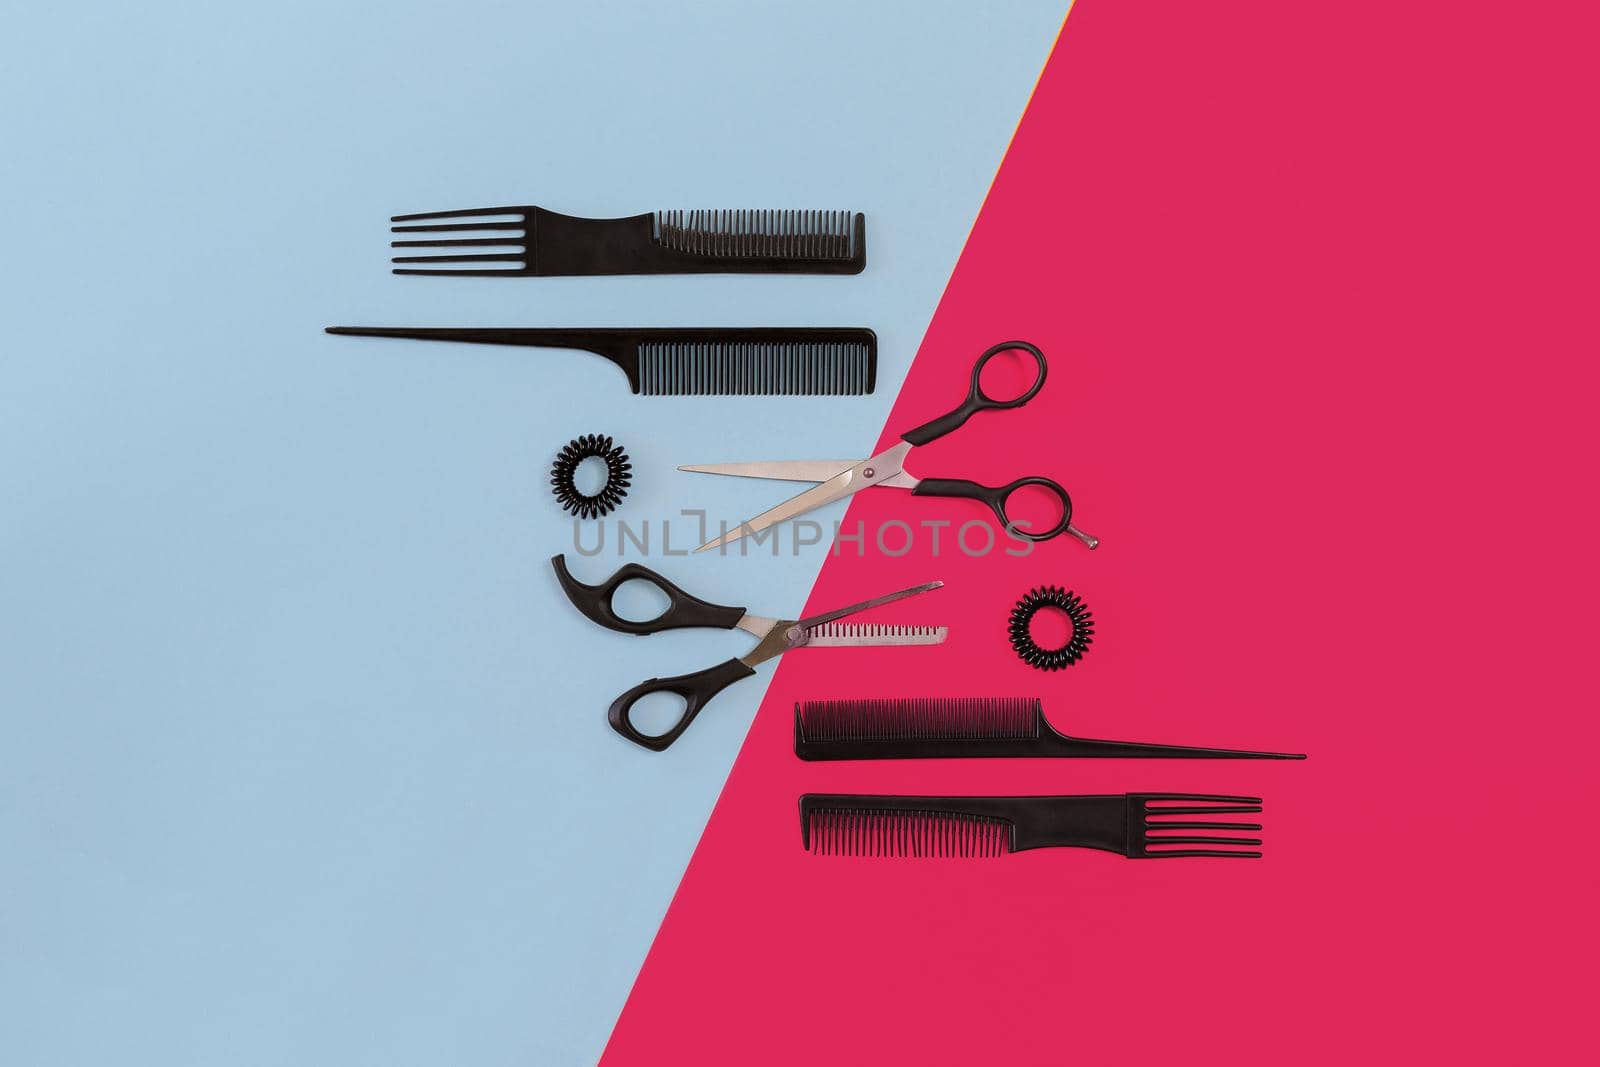 Hairdresser tools on blue and pink background with copy space, top view, flat lay. Comb, scissors. Still life.